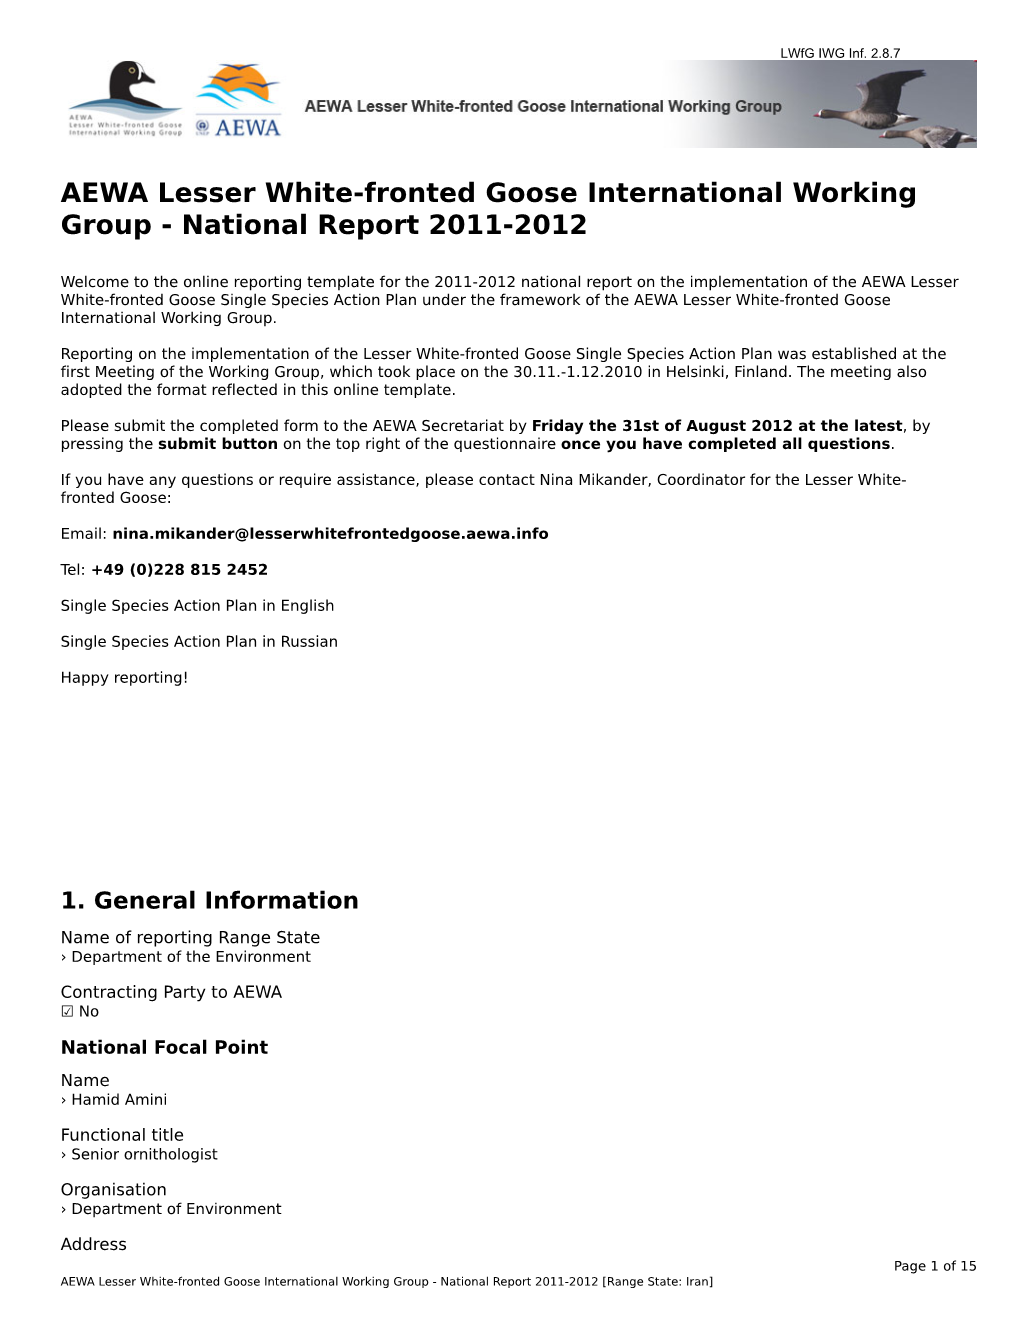 AEWA Lesser White-Fronted Goose International Working Group - National Report 2011-2012